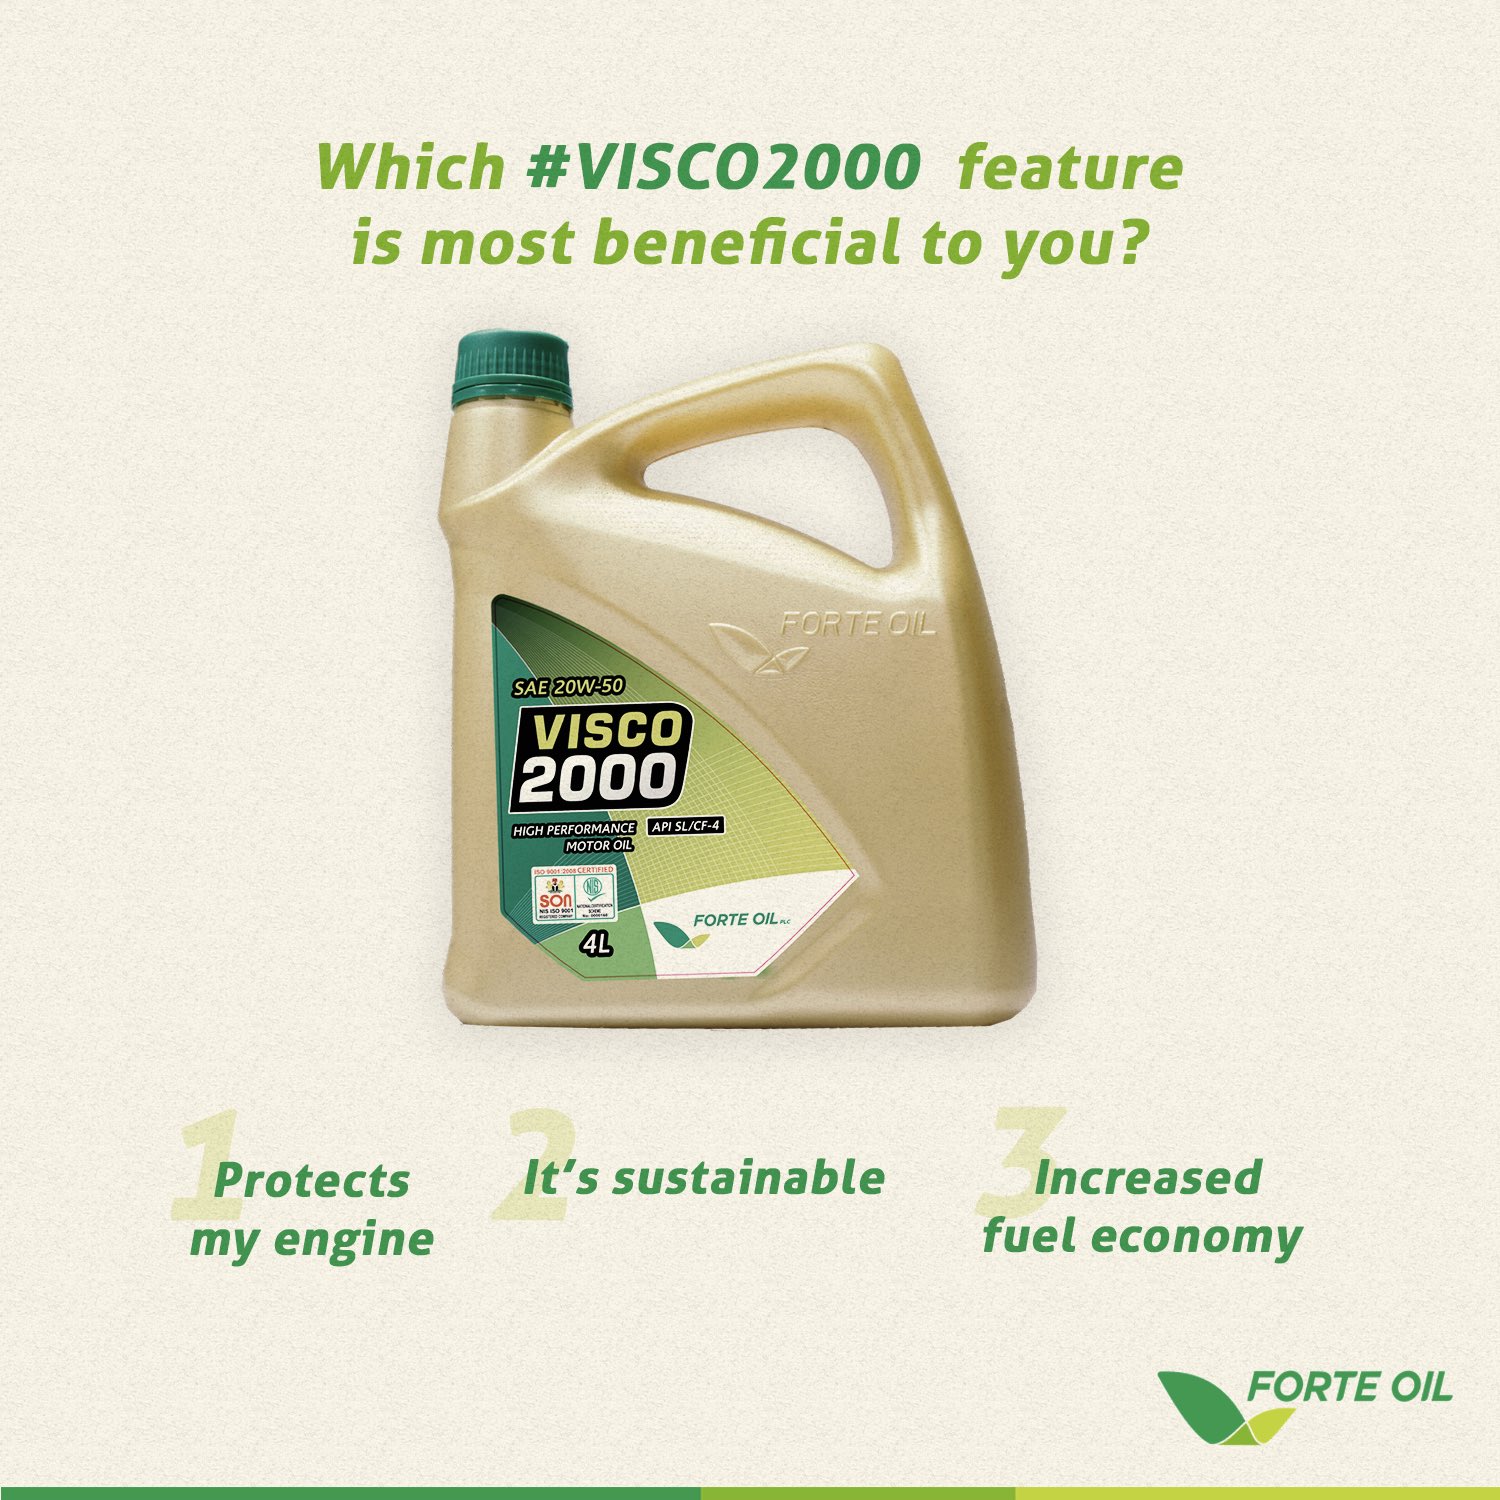 ardova-plc-on-twitter-forte-oil-visco2000-is-a-high-performance-engine-oil-that-protects-and